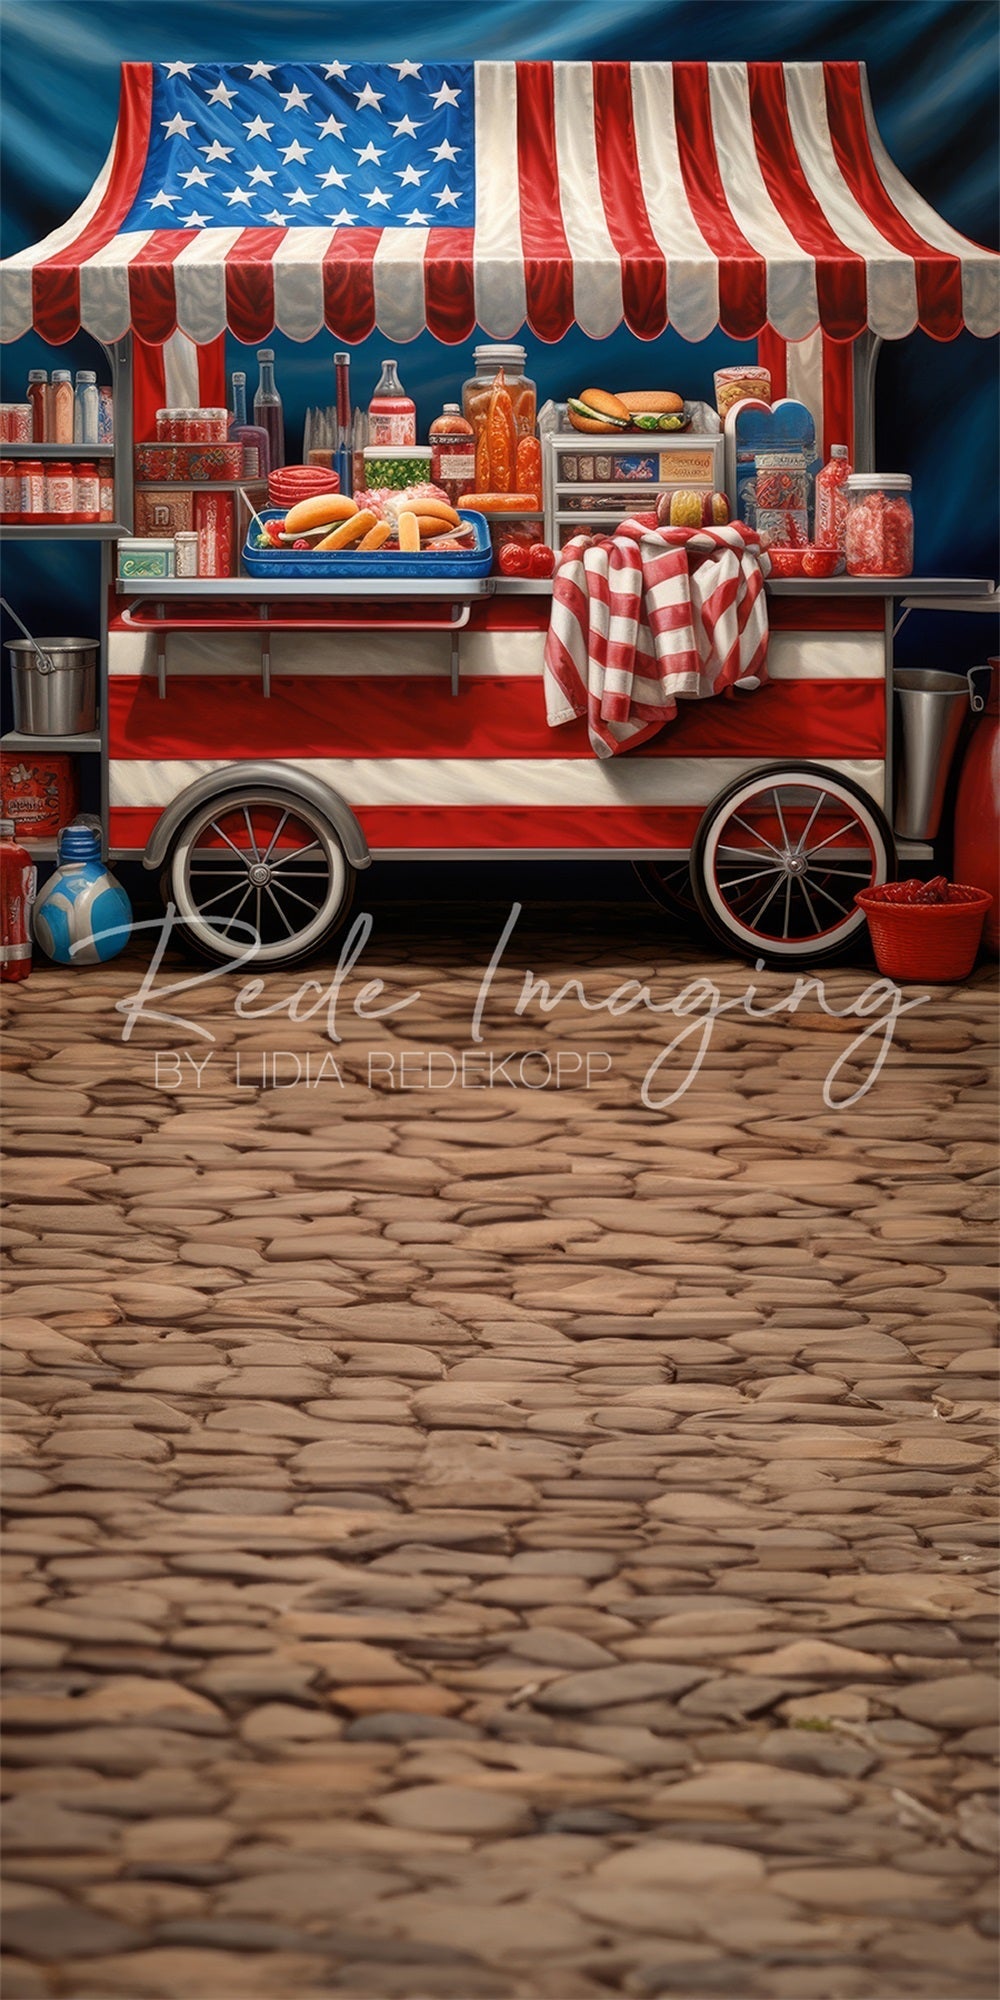 Lightning Deal #3 Kate Sweep Independence Day Red Plaid Cloth Iron Hot Dog Stand Backdrop Designed by Lidia Redekopp